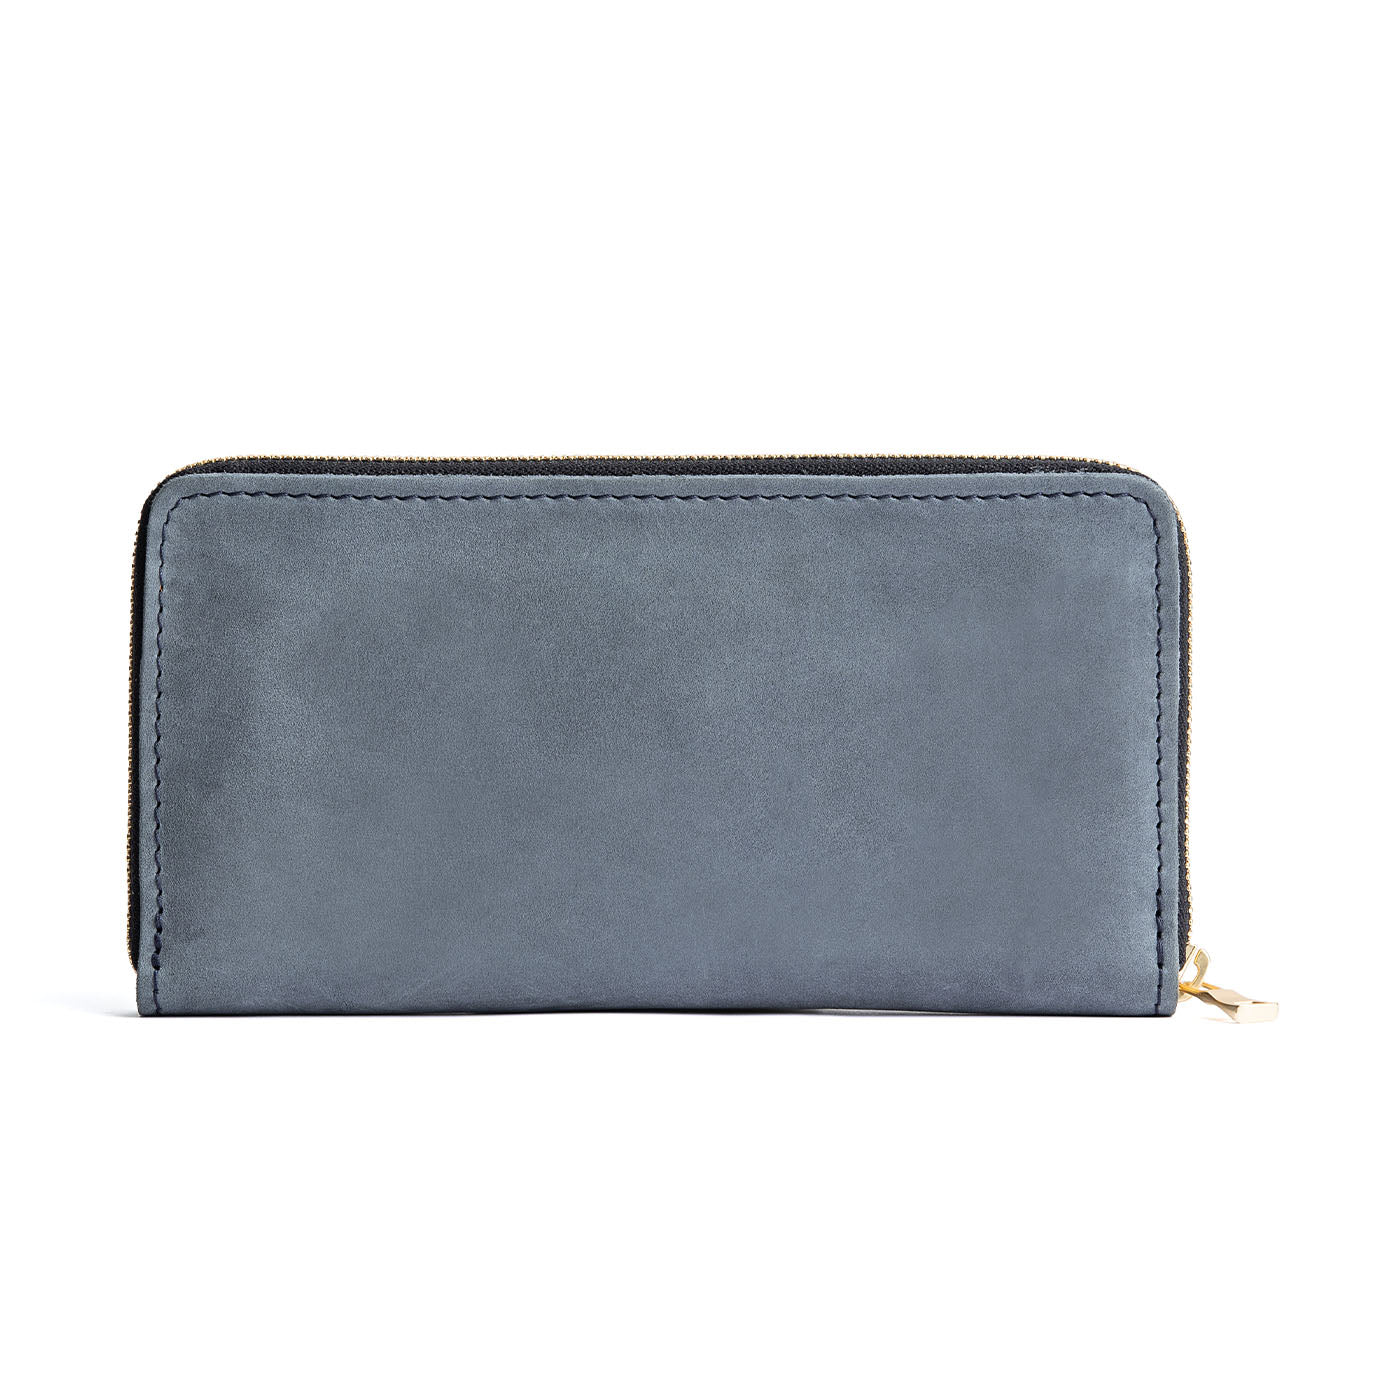 All Color: Storm | leather handmade wallet